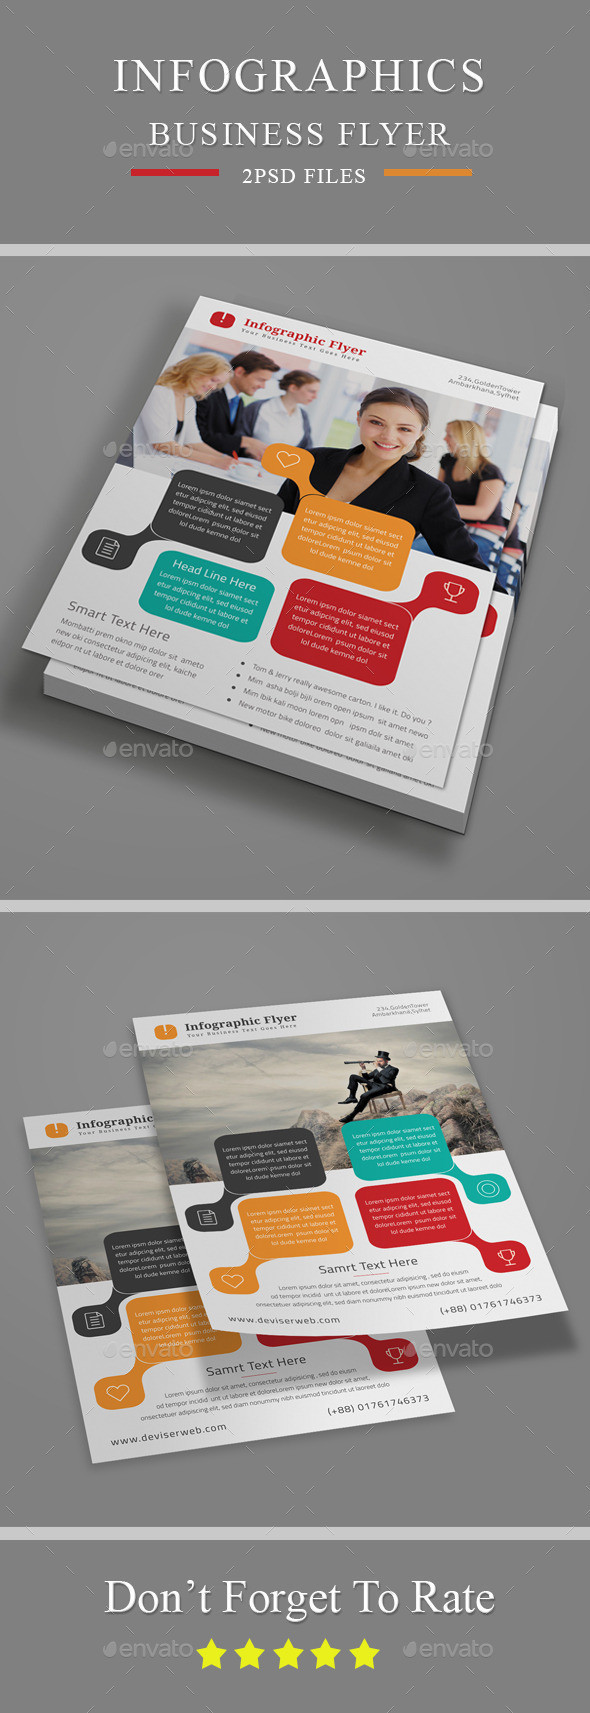 Infographics business flyer template